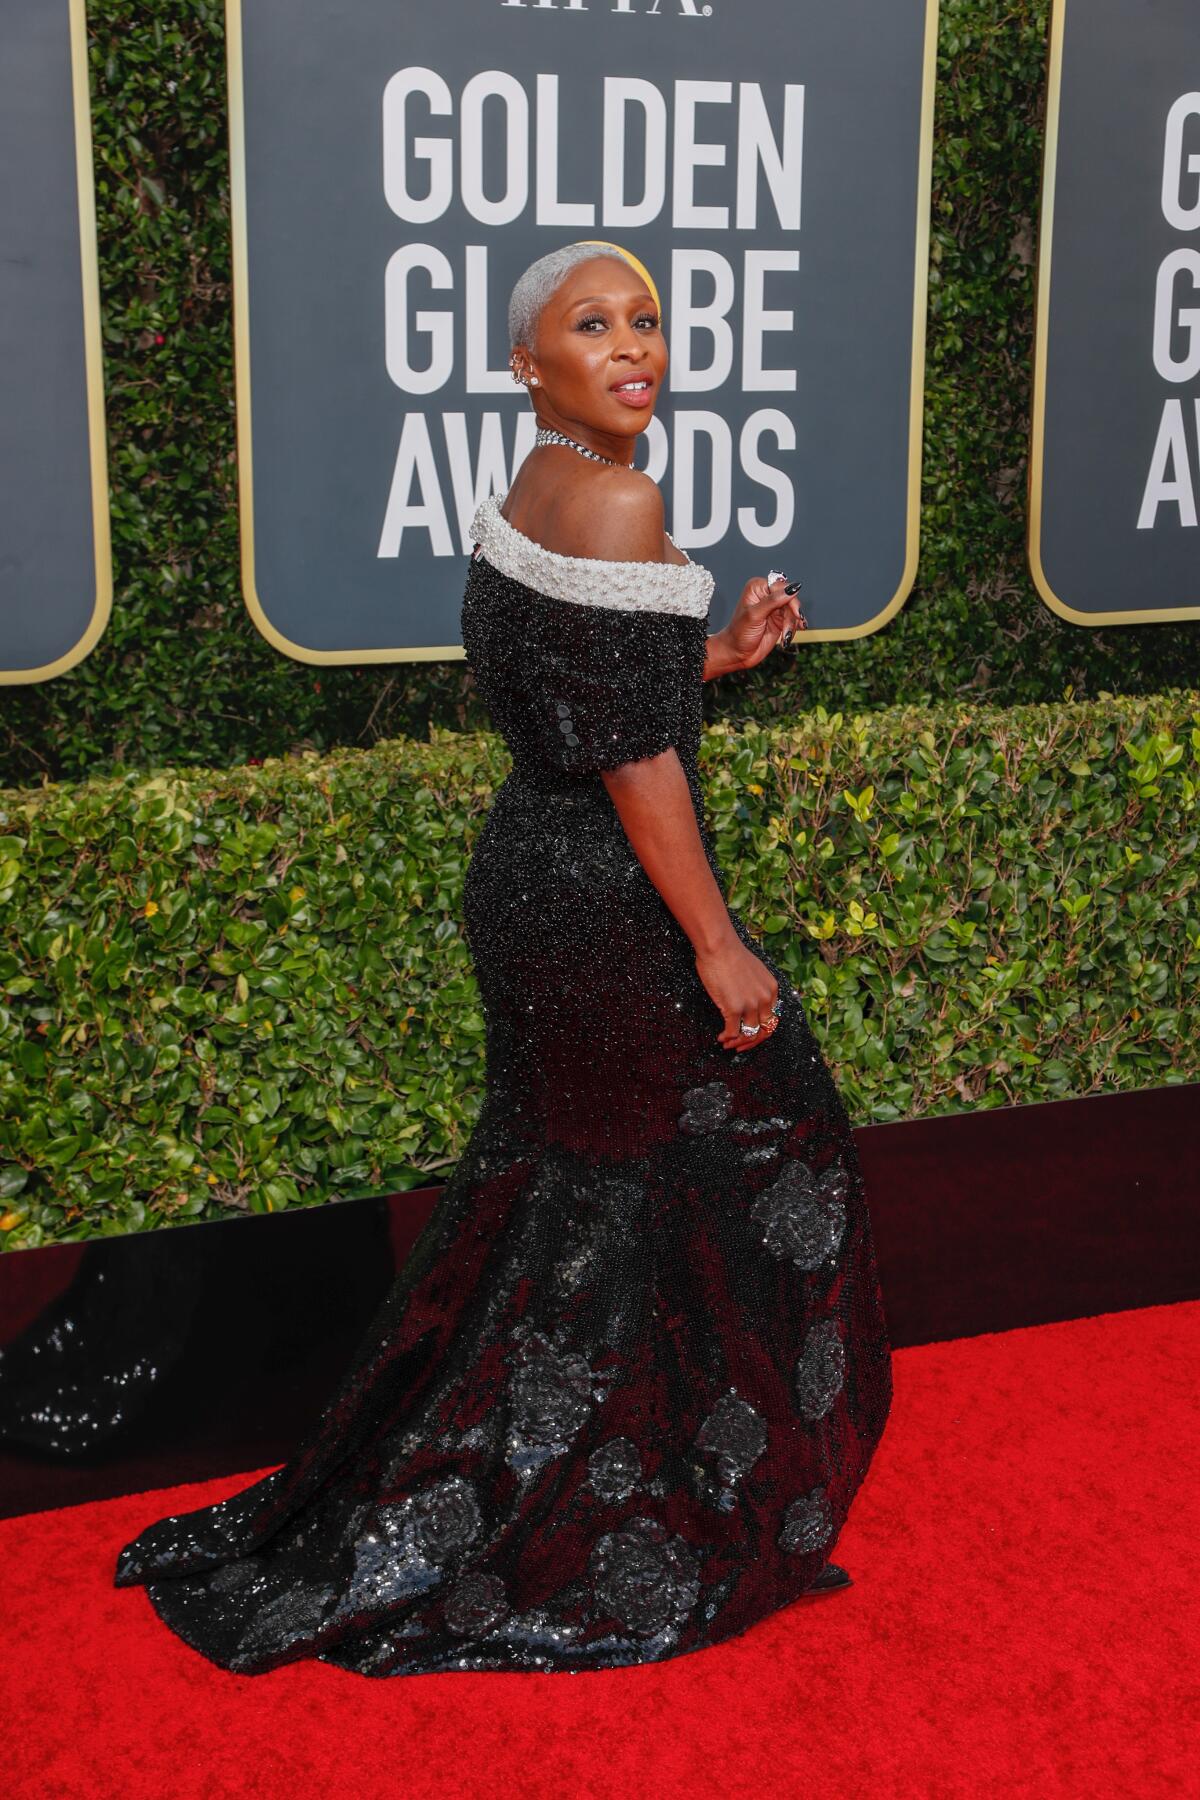 Cynthia Erivo chose custom Thom Browne for the 77th Golden Globe Awards at the Beverly Hilton.